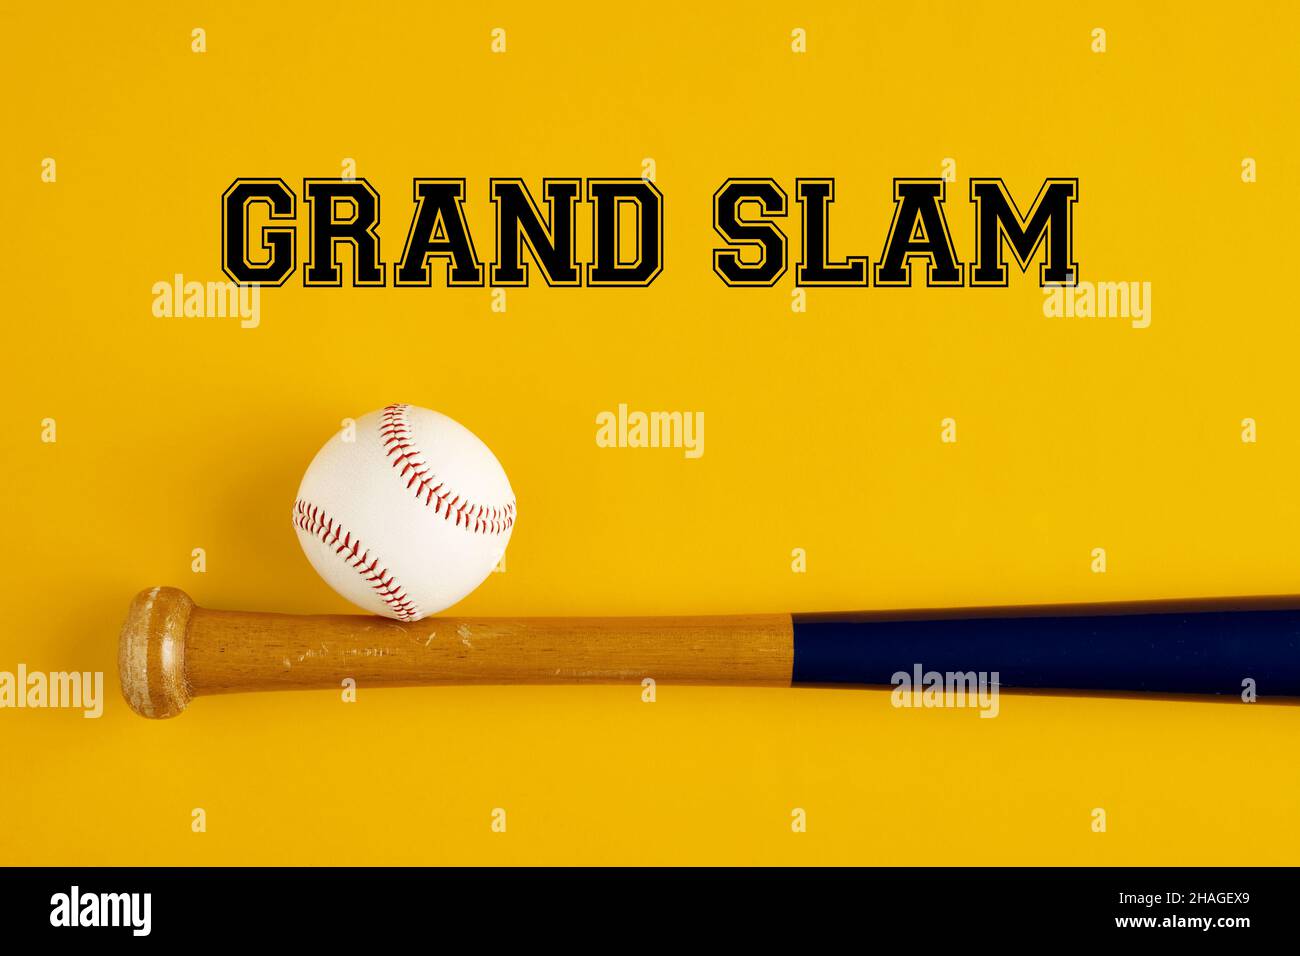 Baseball bat and a ball on yellow background with the word grand slam. Baseball terms concept. Stock Photo